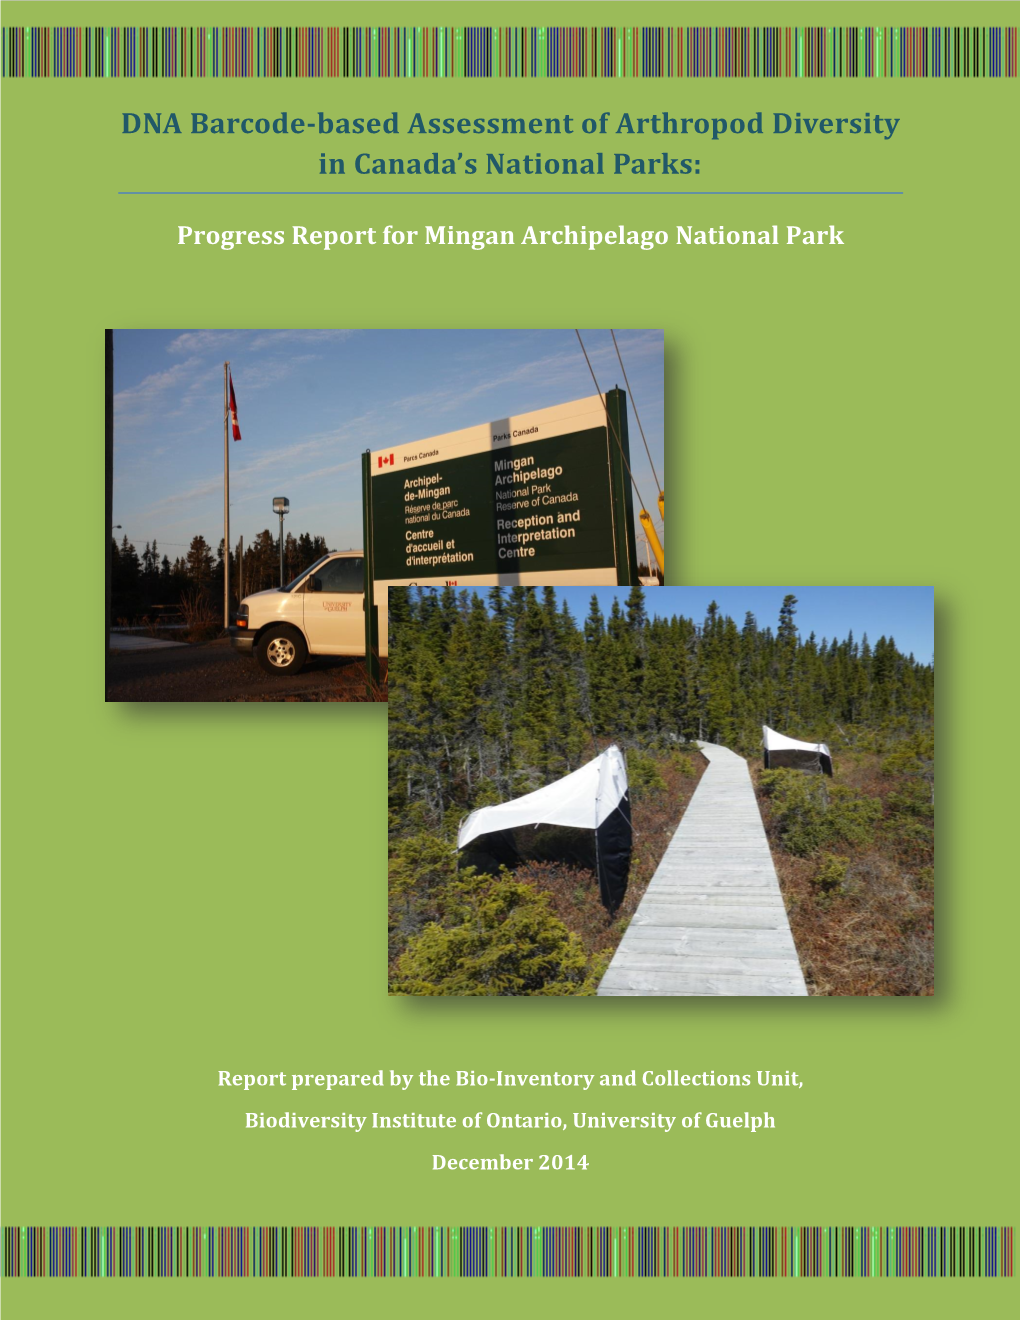 DNA Barcode-Based Assessment of Arthropod Diversity in Canada's National Parks